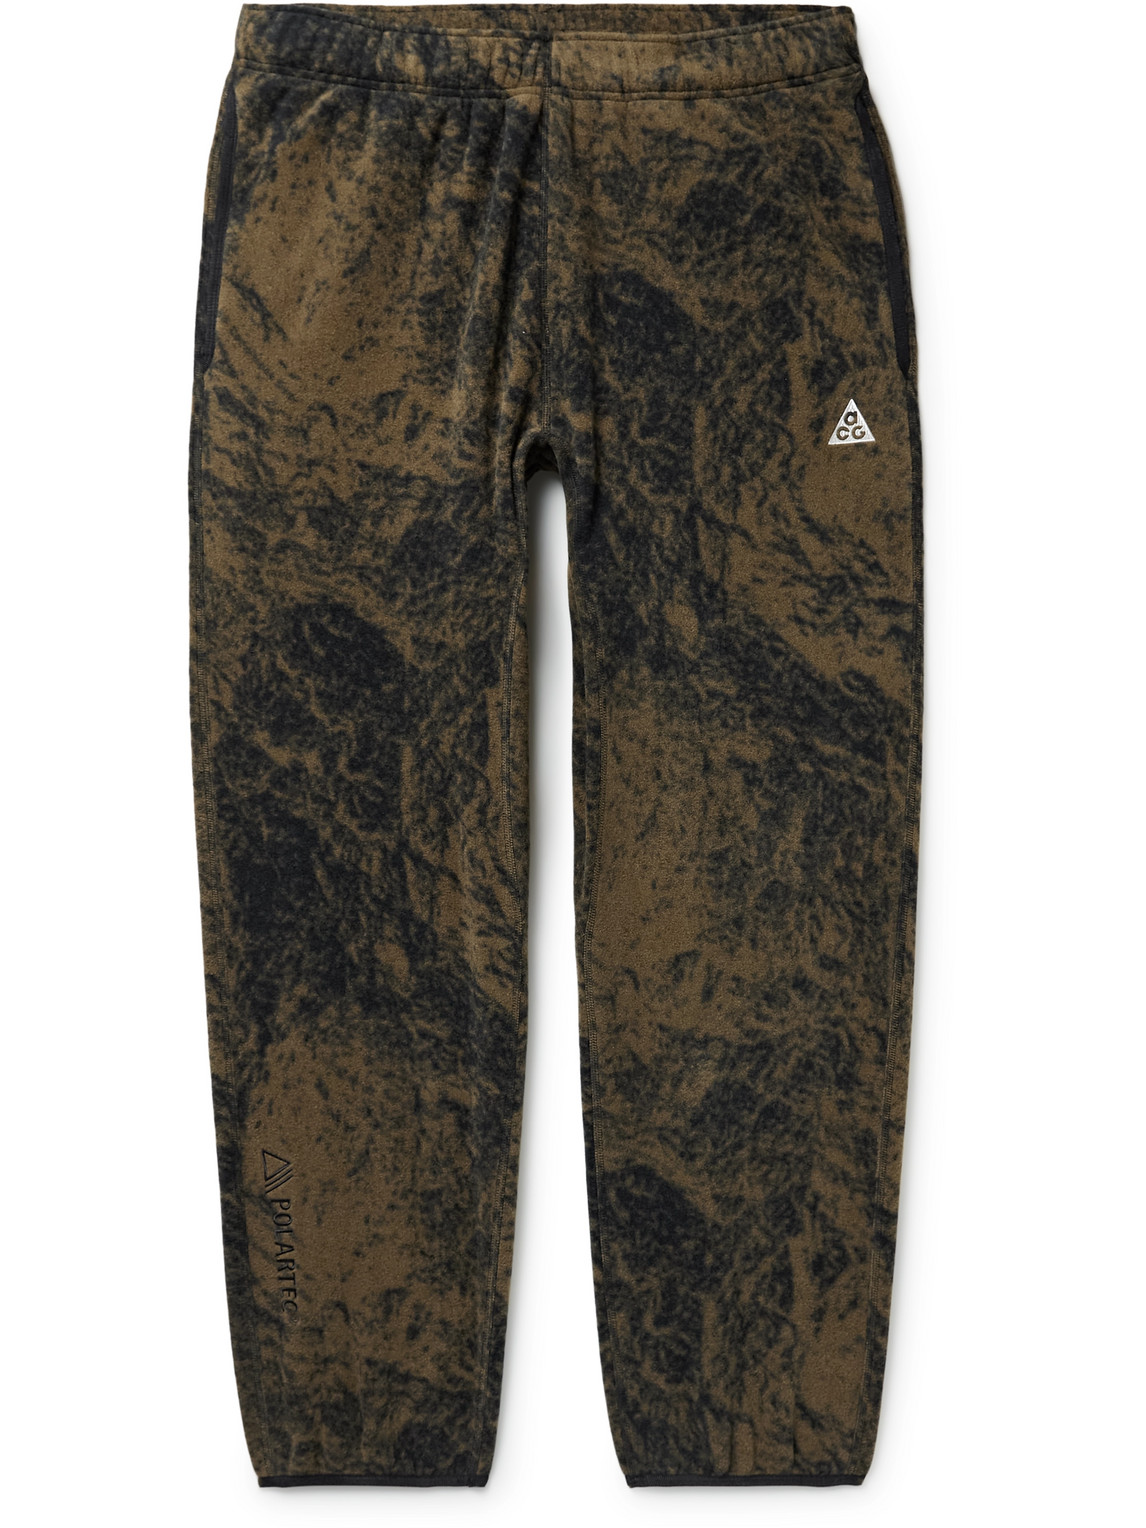 ACG NRG Wolf Tree Tapered Printed Recycled Polartec Therma-FIT Sweatpants